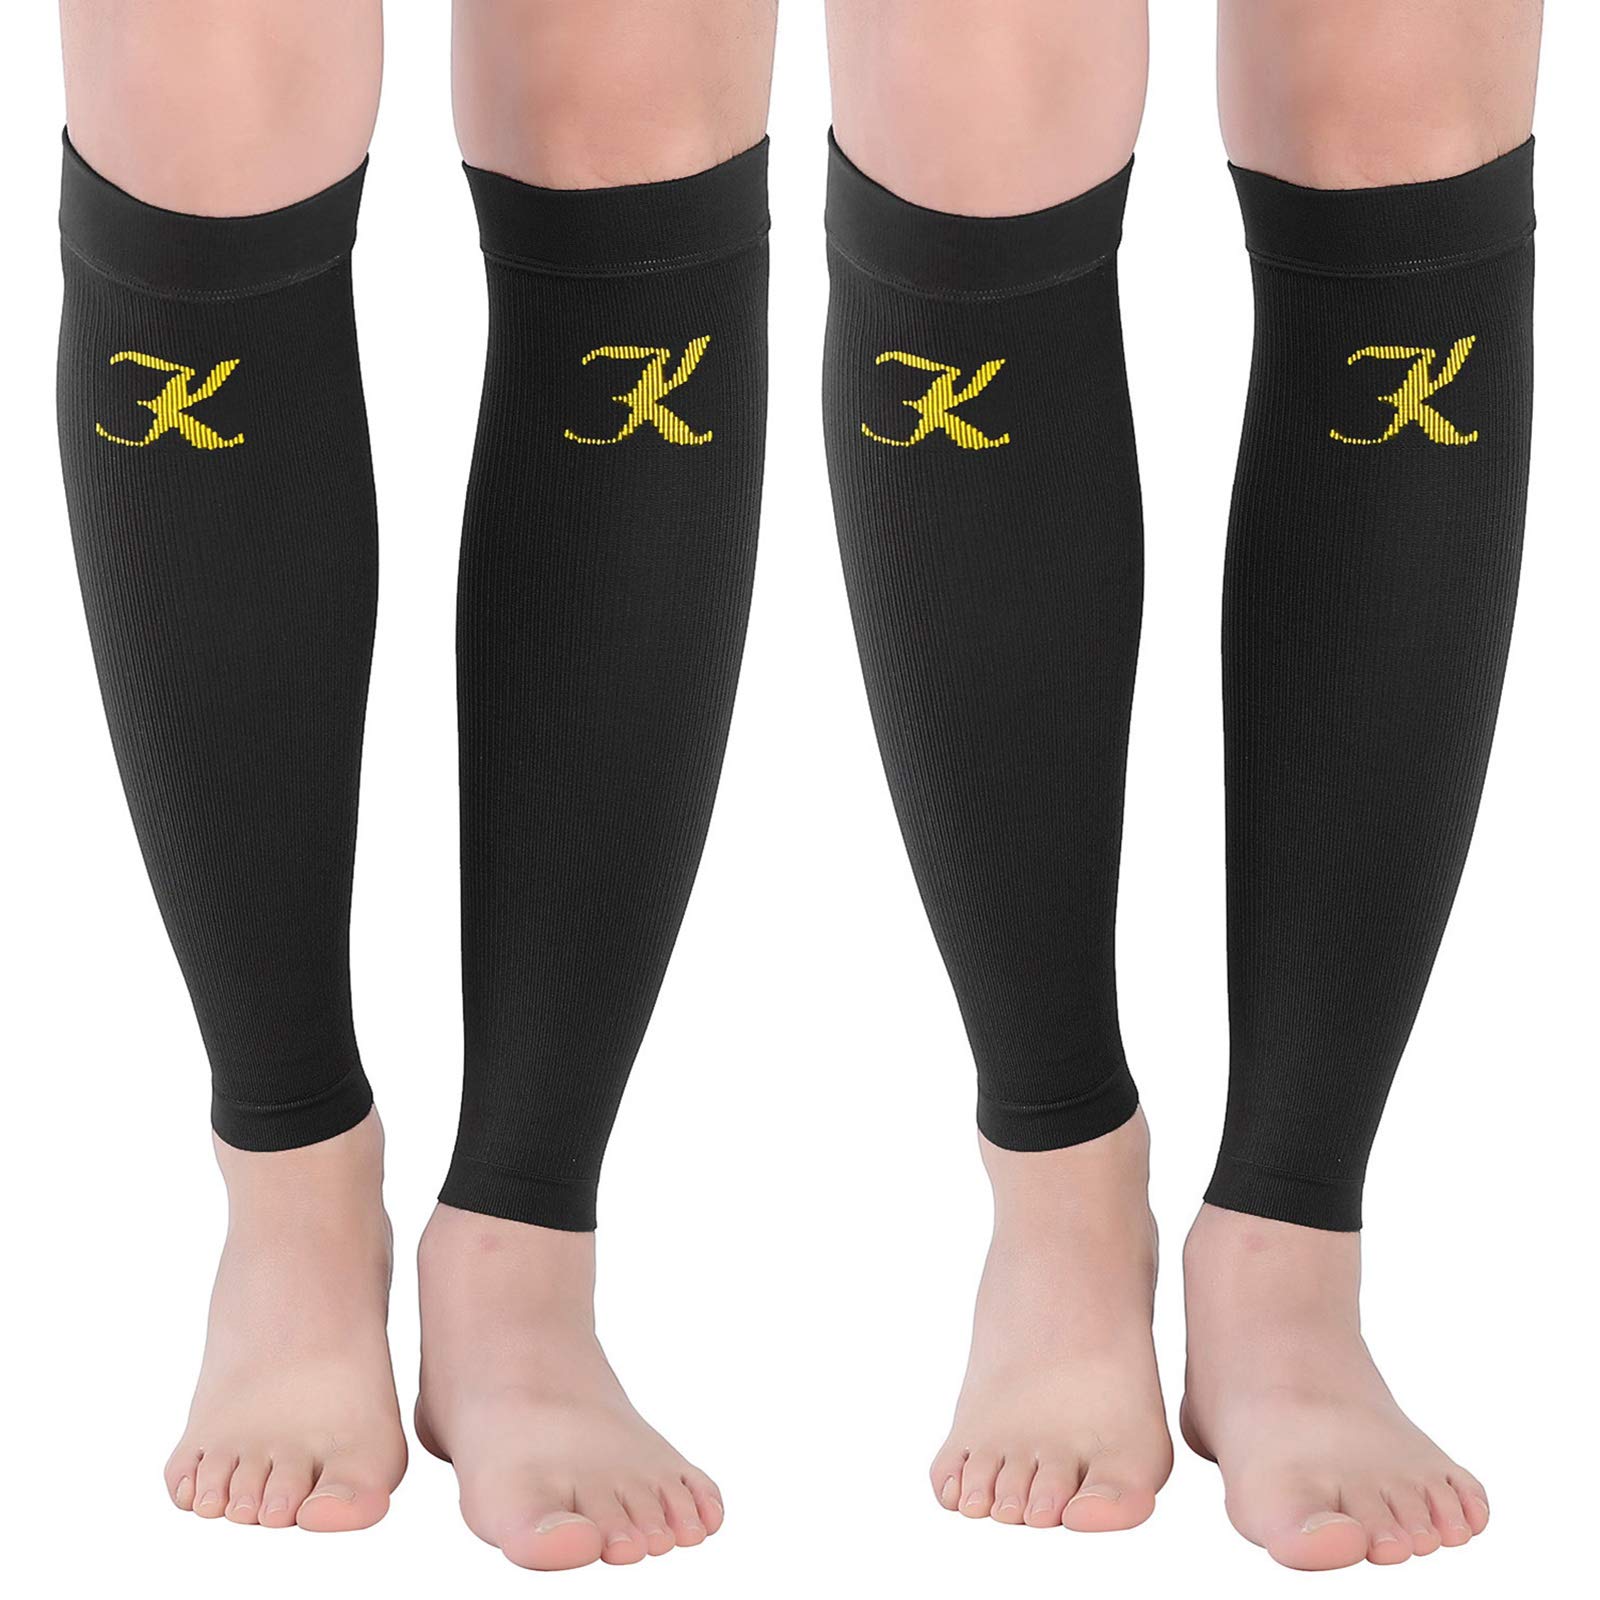 KEKING Thigh High Compression Stockings Footless, Unisex, 15